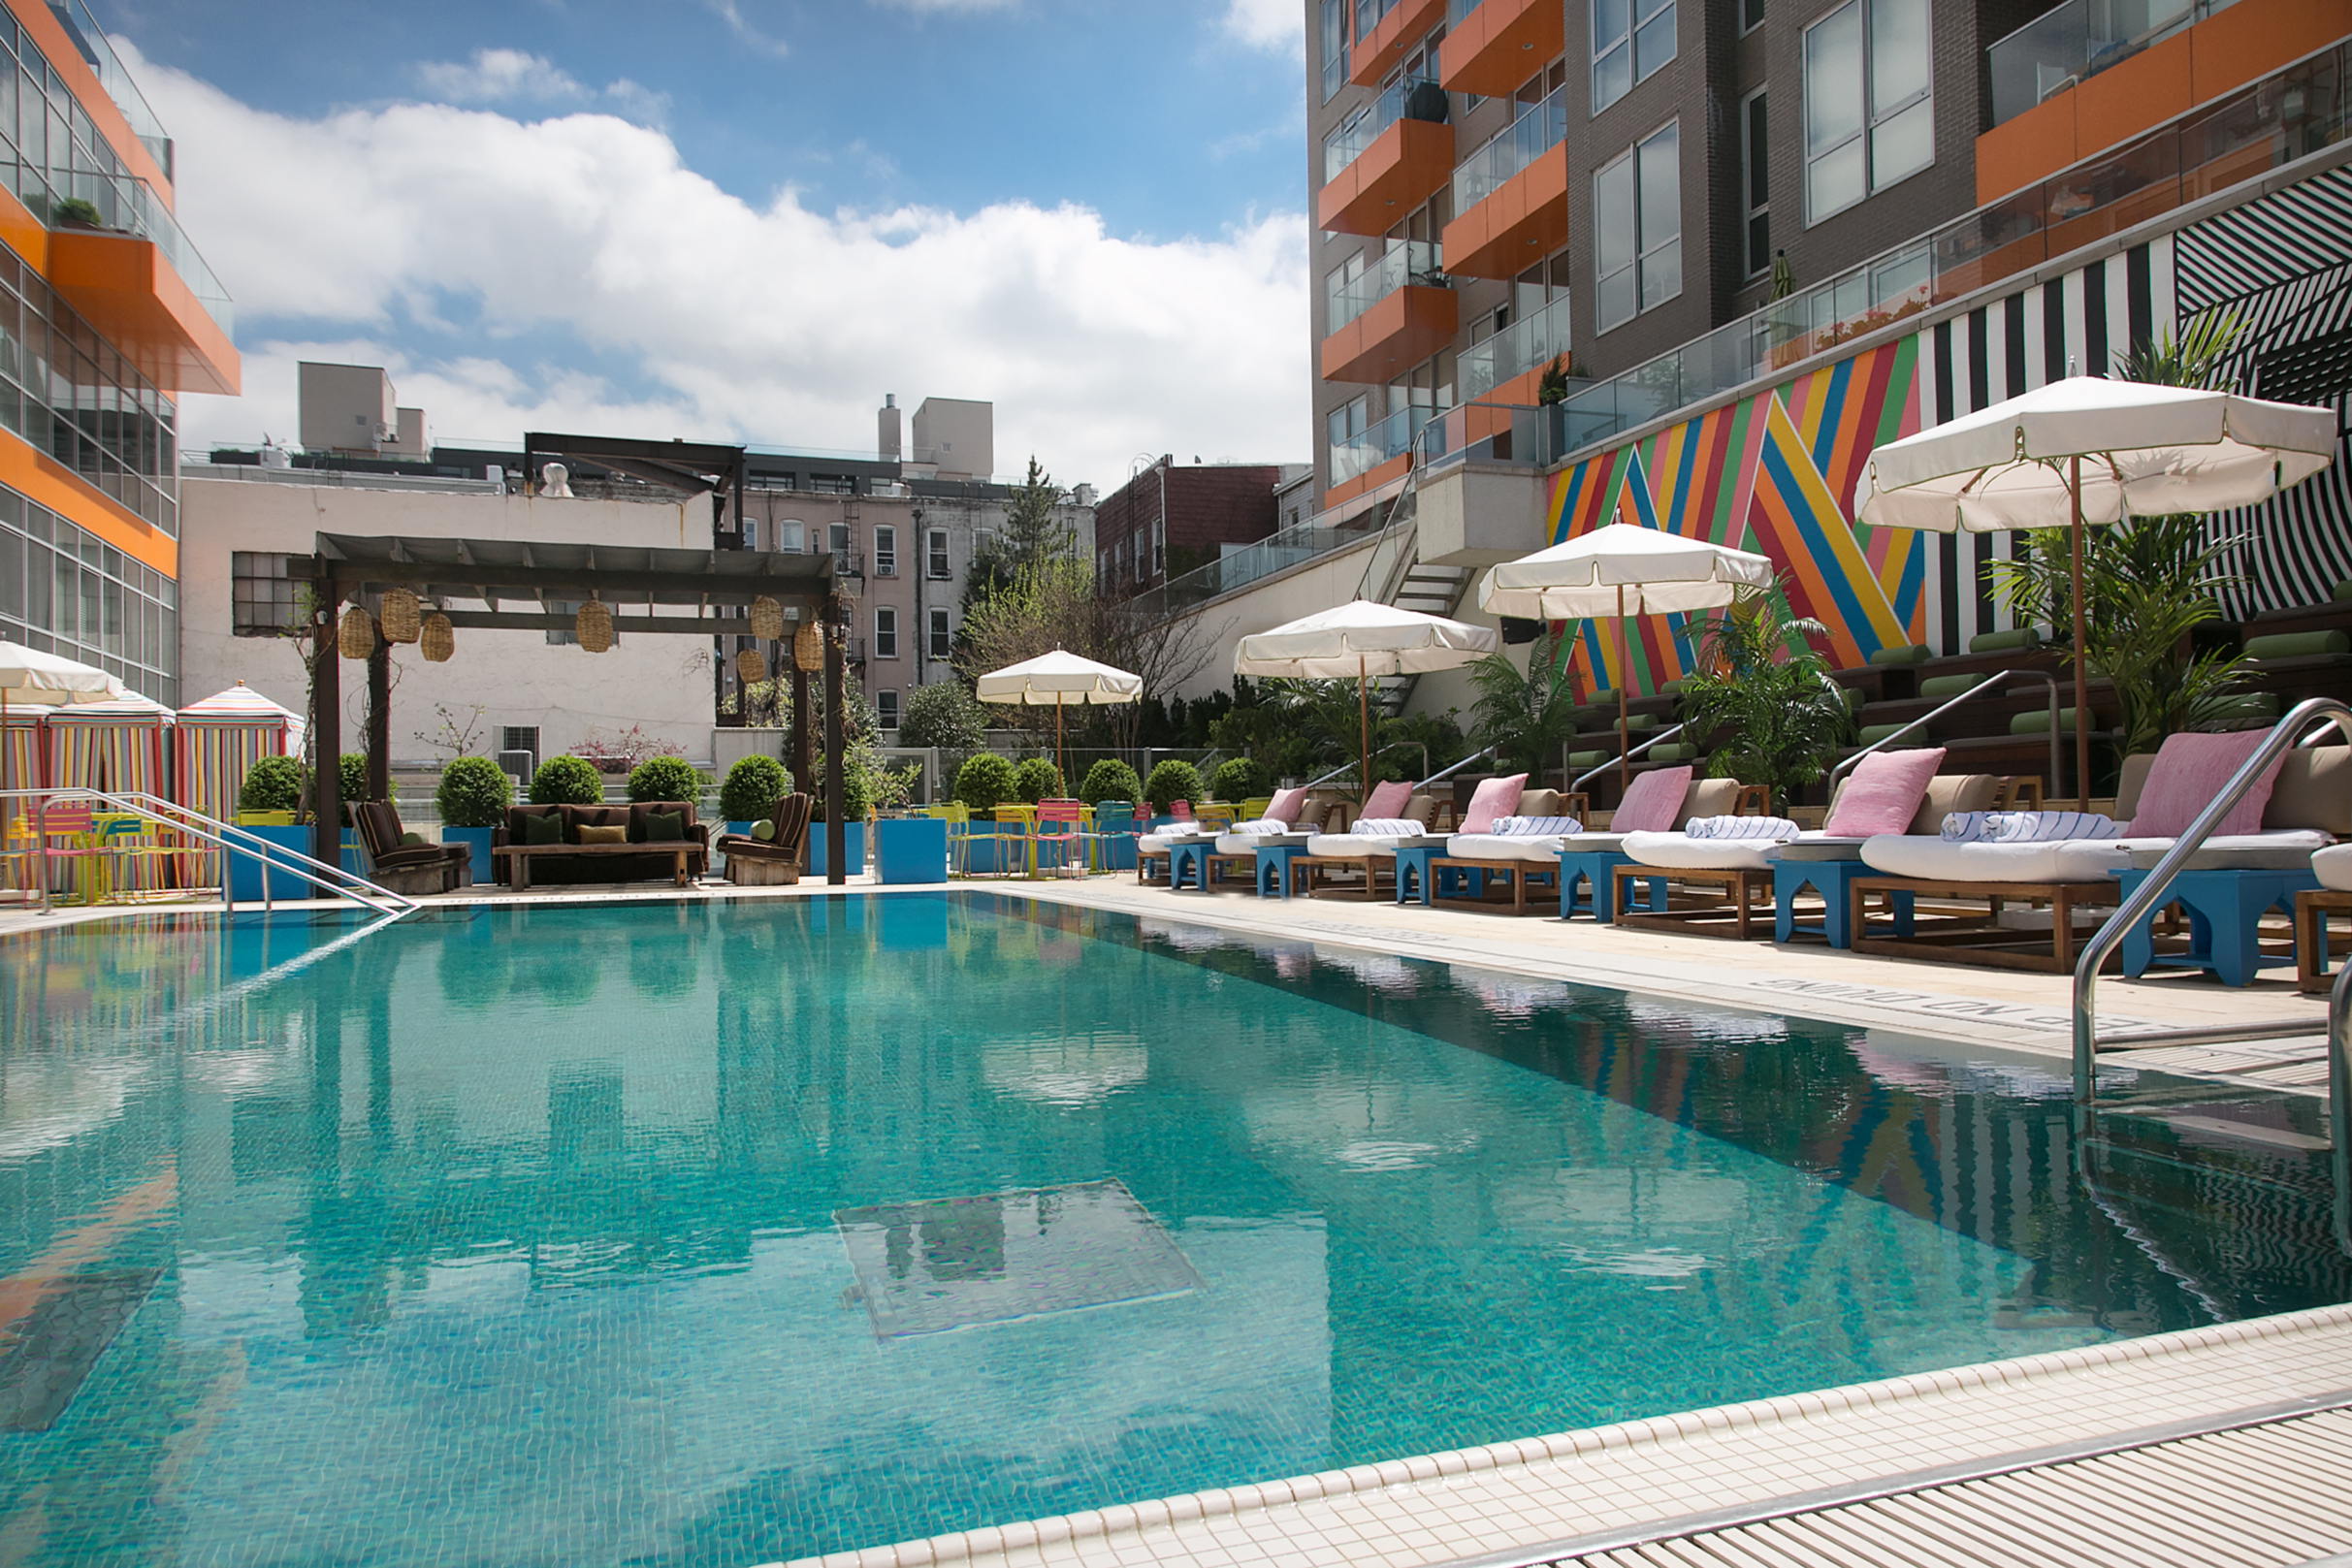 Passes for the McCarren Hotel pool are now available for the season